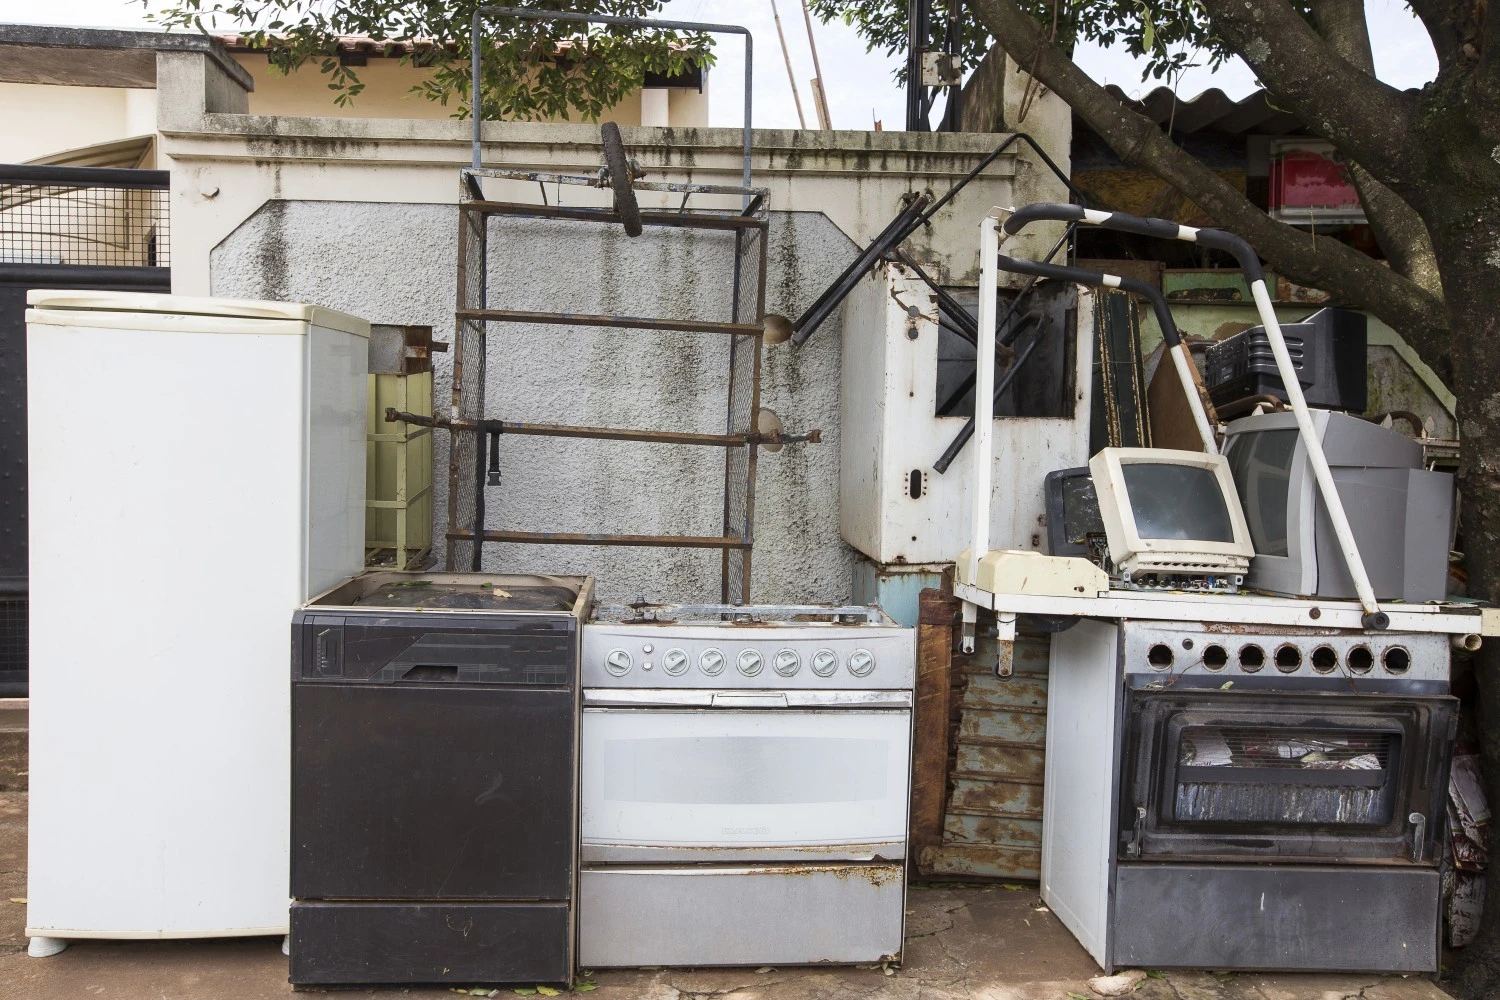 Where to Recycle Electronic Waste